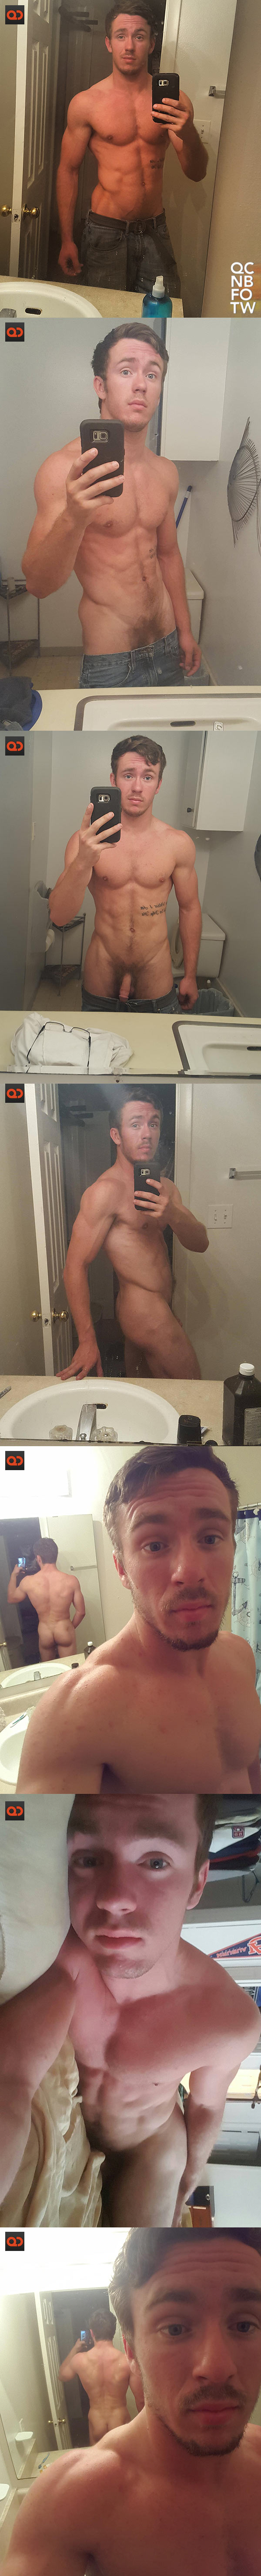 nude_bf_of_the_week-pensacola_cutie-collage01